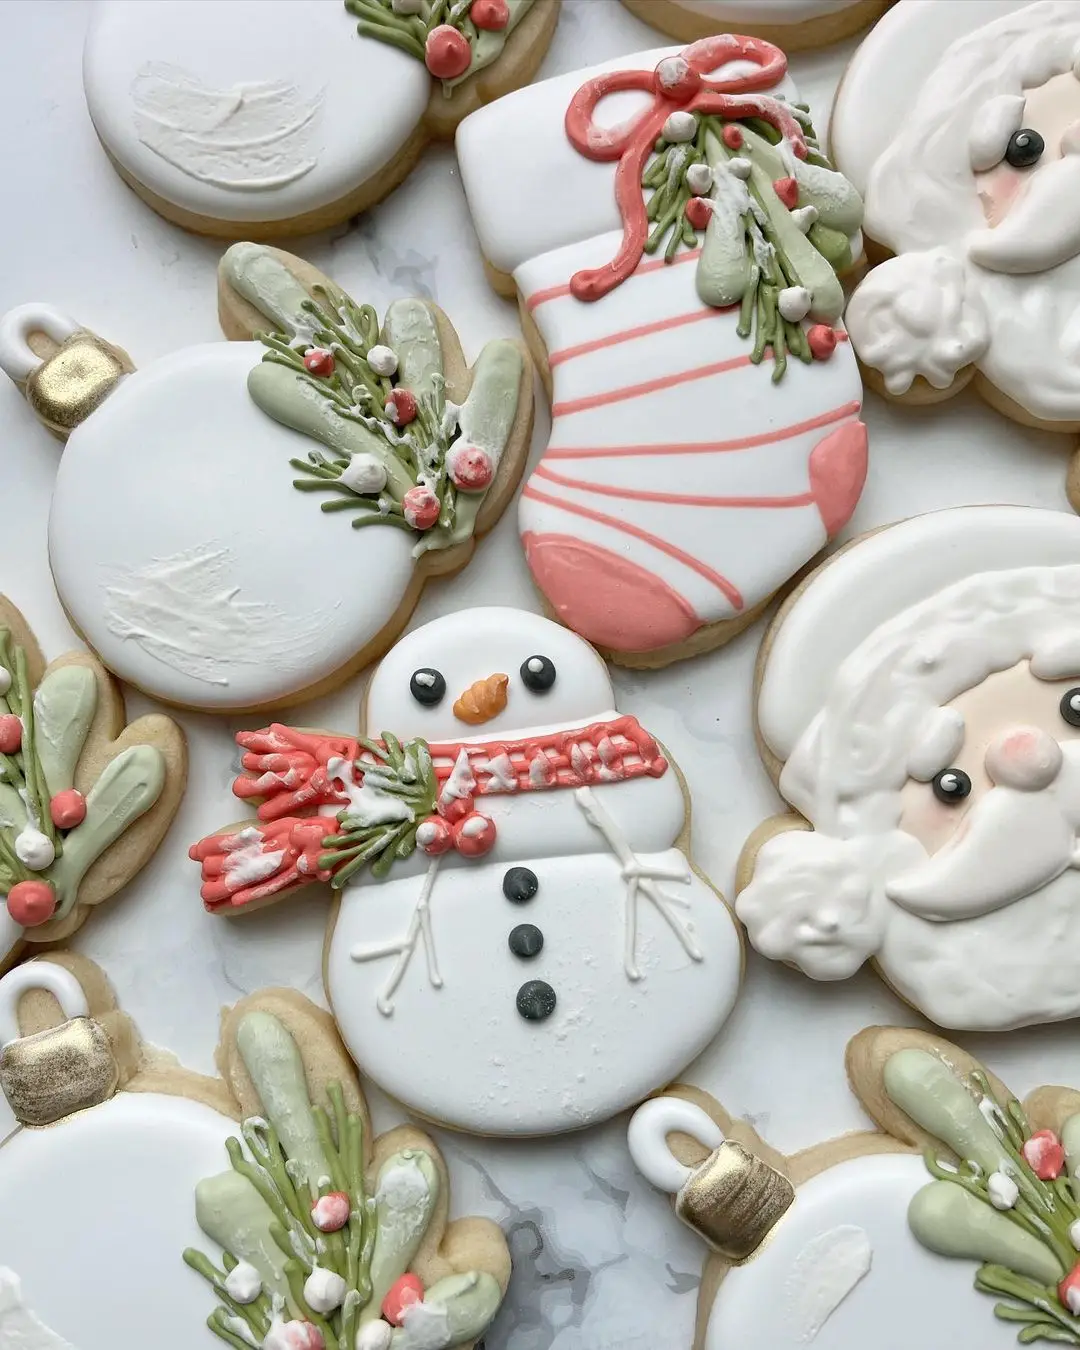 7 Intensely Adorable Snowman Snack Recipes ...